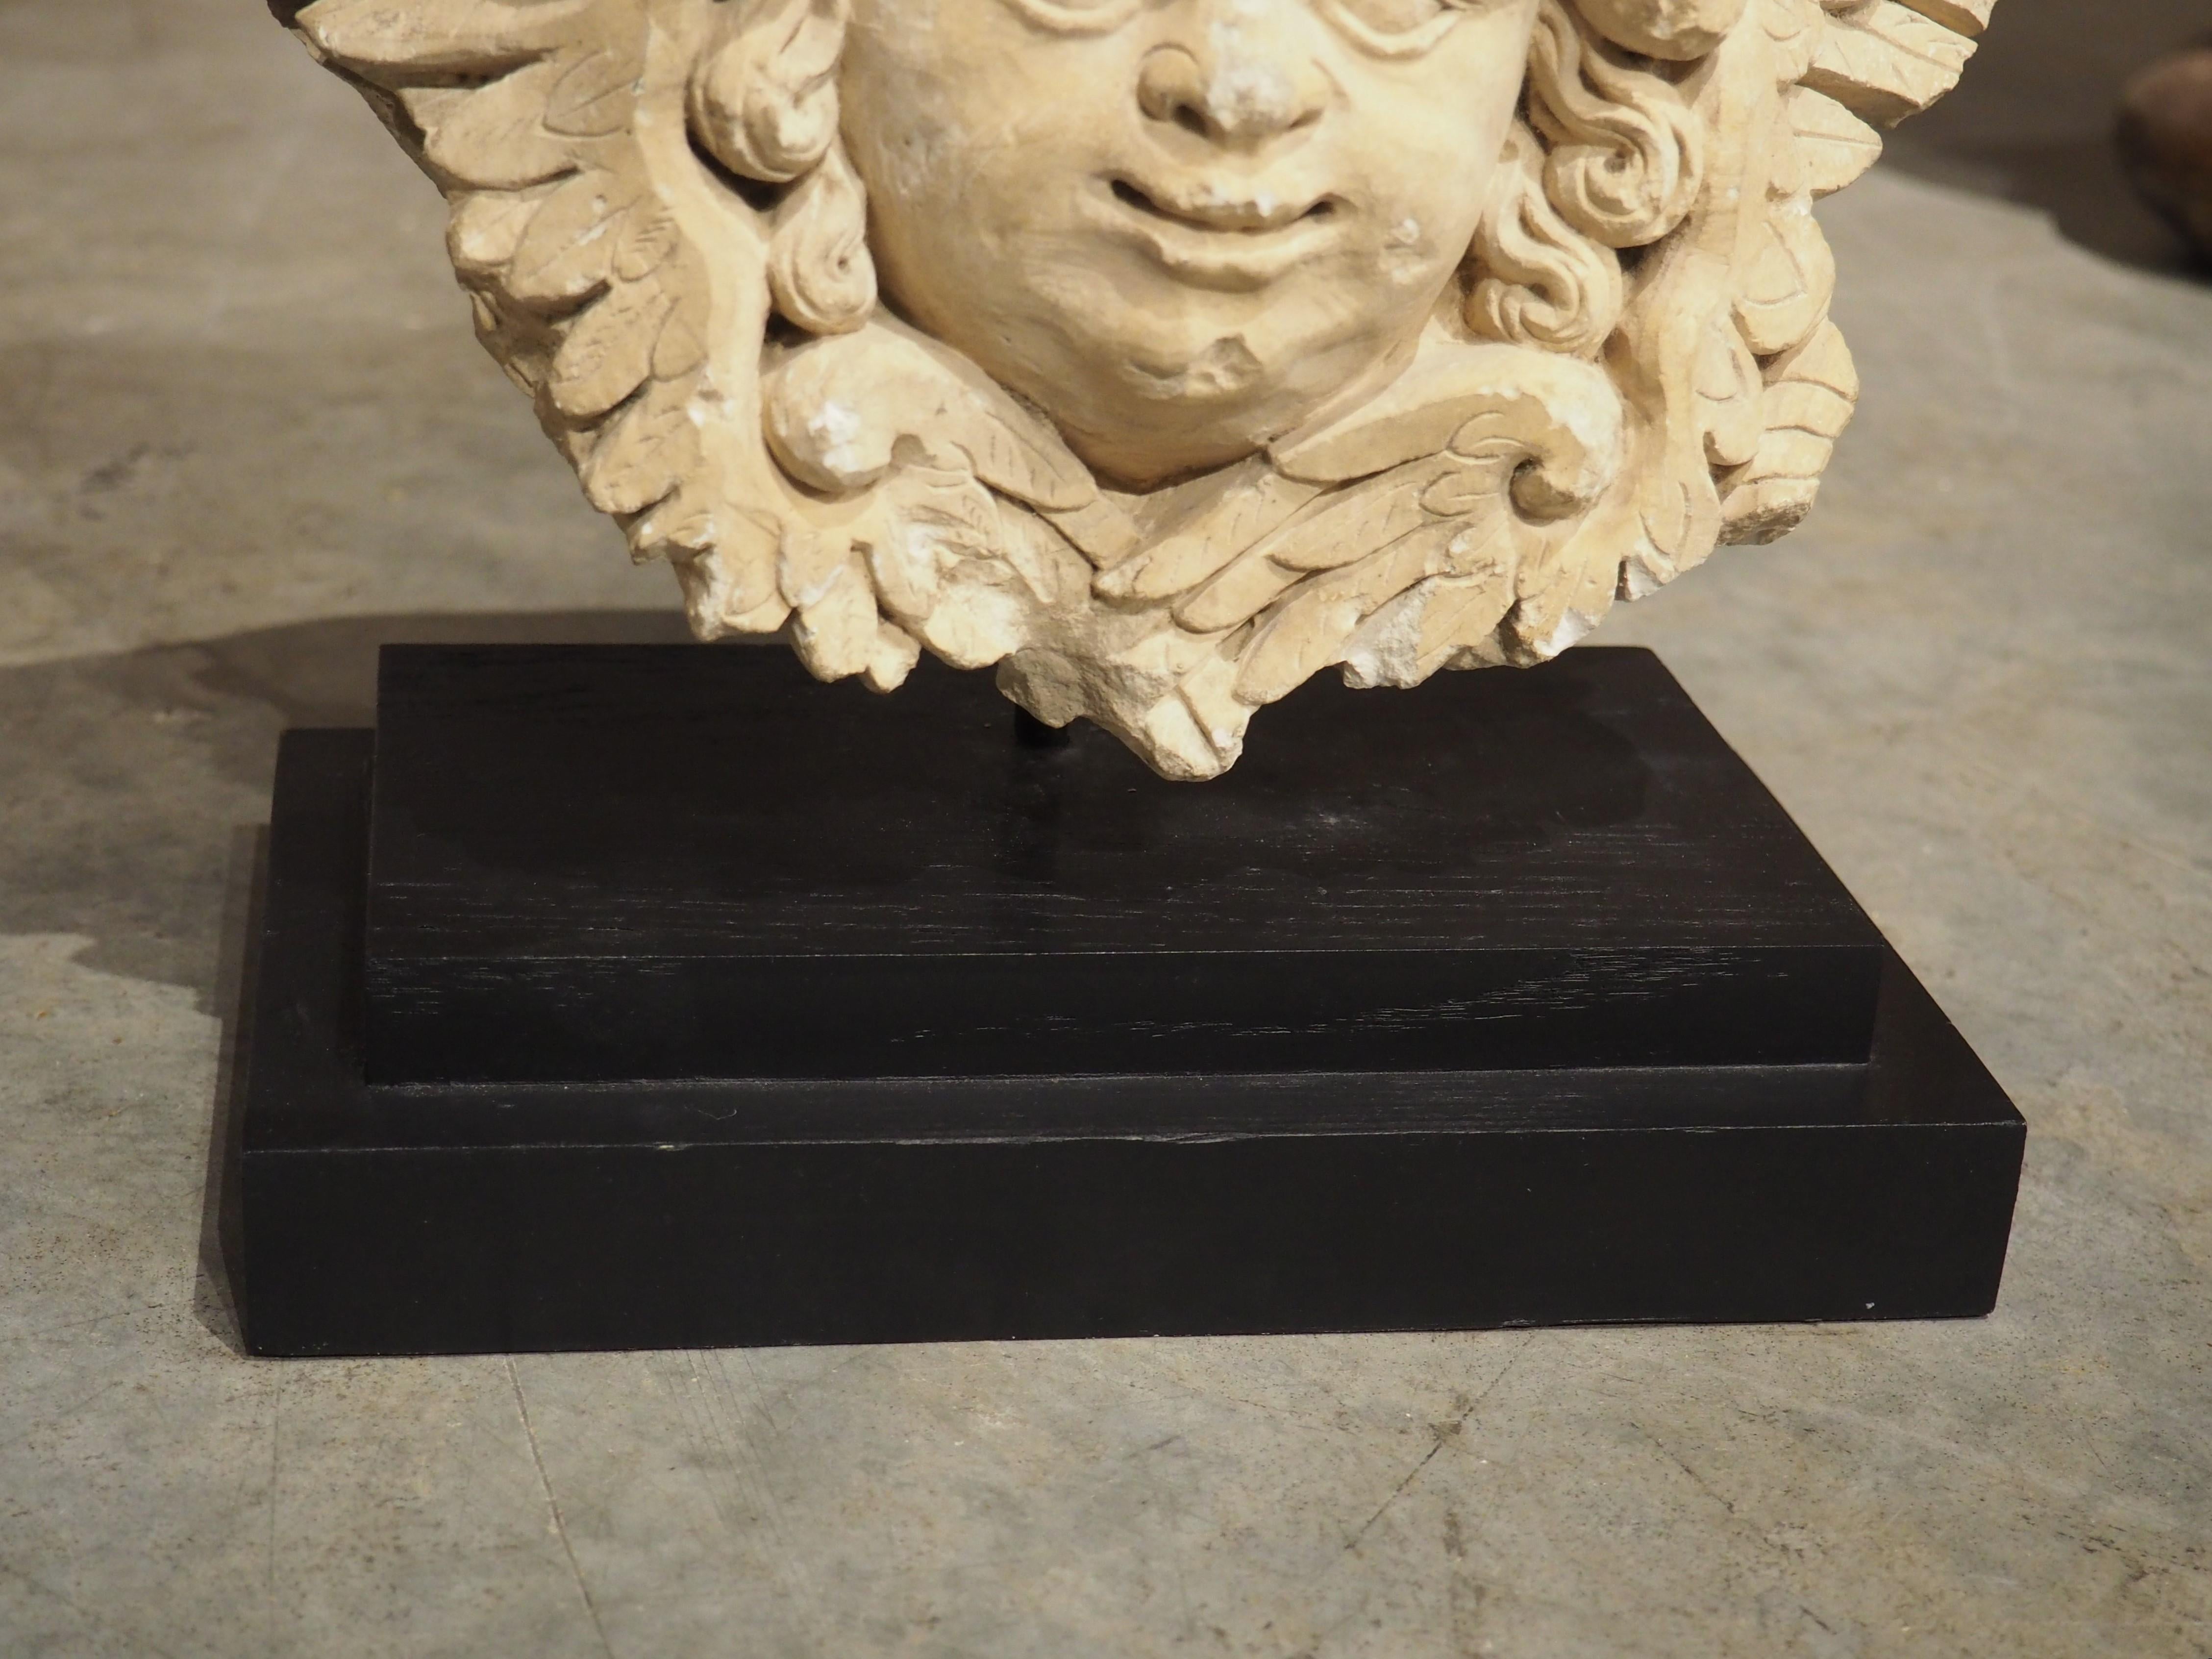 Originally part of a larger architectural from a French building in the 1600s, this hand-carved limestone fragment of a winged angel has been mounted more recently to a painted black stand with a metal arm. The plinth has a stepped molding and a